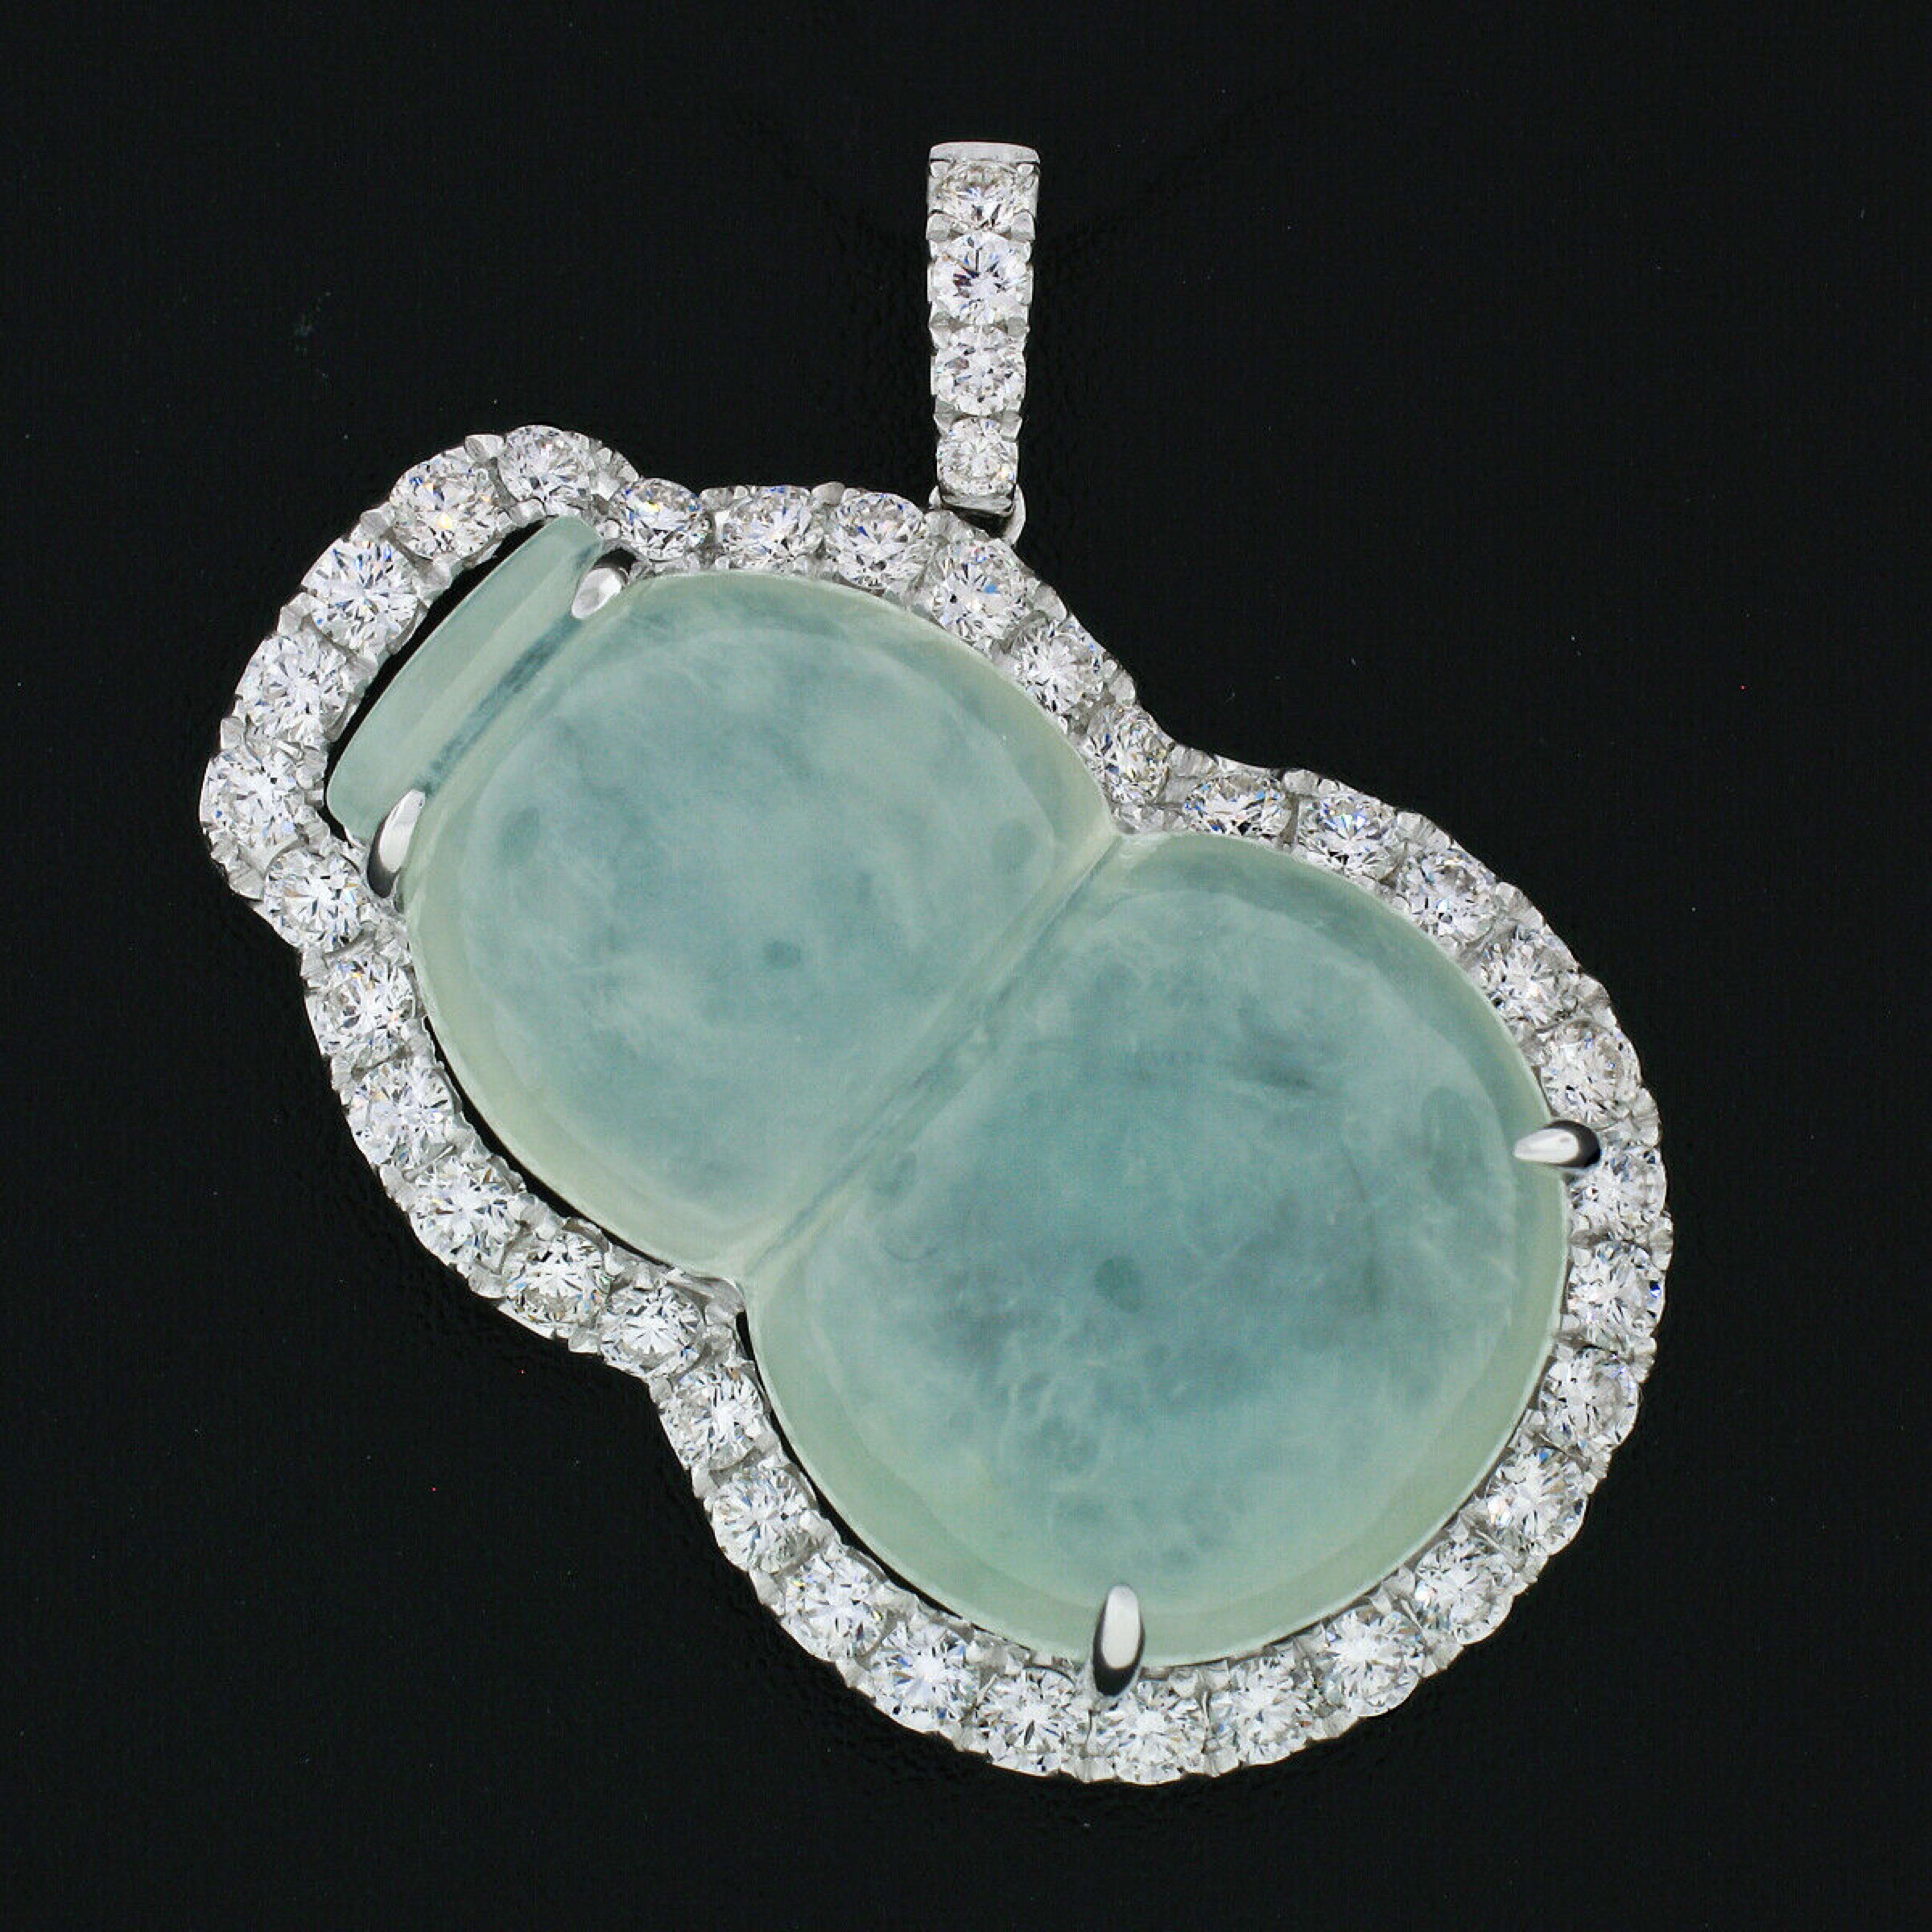 Here we have a beautiful jadeite and diamond pendant crafted from solid 18k white gold. The pendant features a free-form carved, natural, pale grayish green jadeite jade prong set at its center. The jadeite is surrounded by a halo of super fine